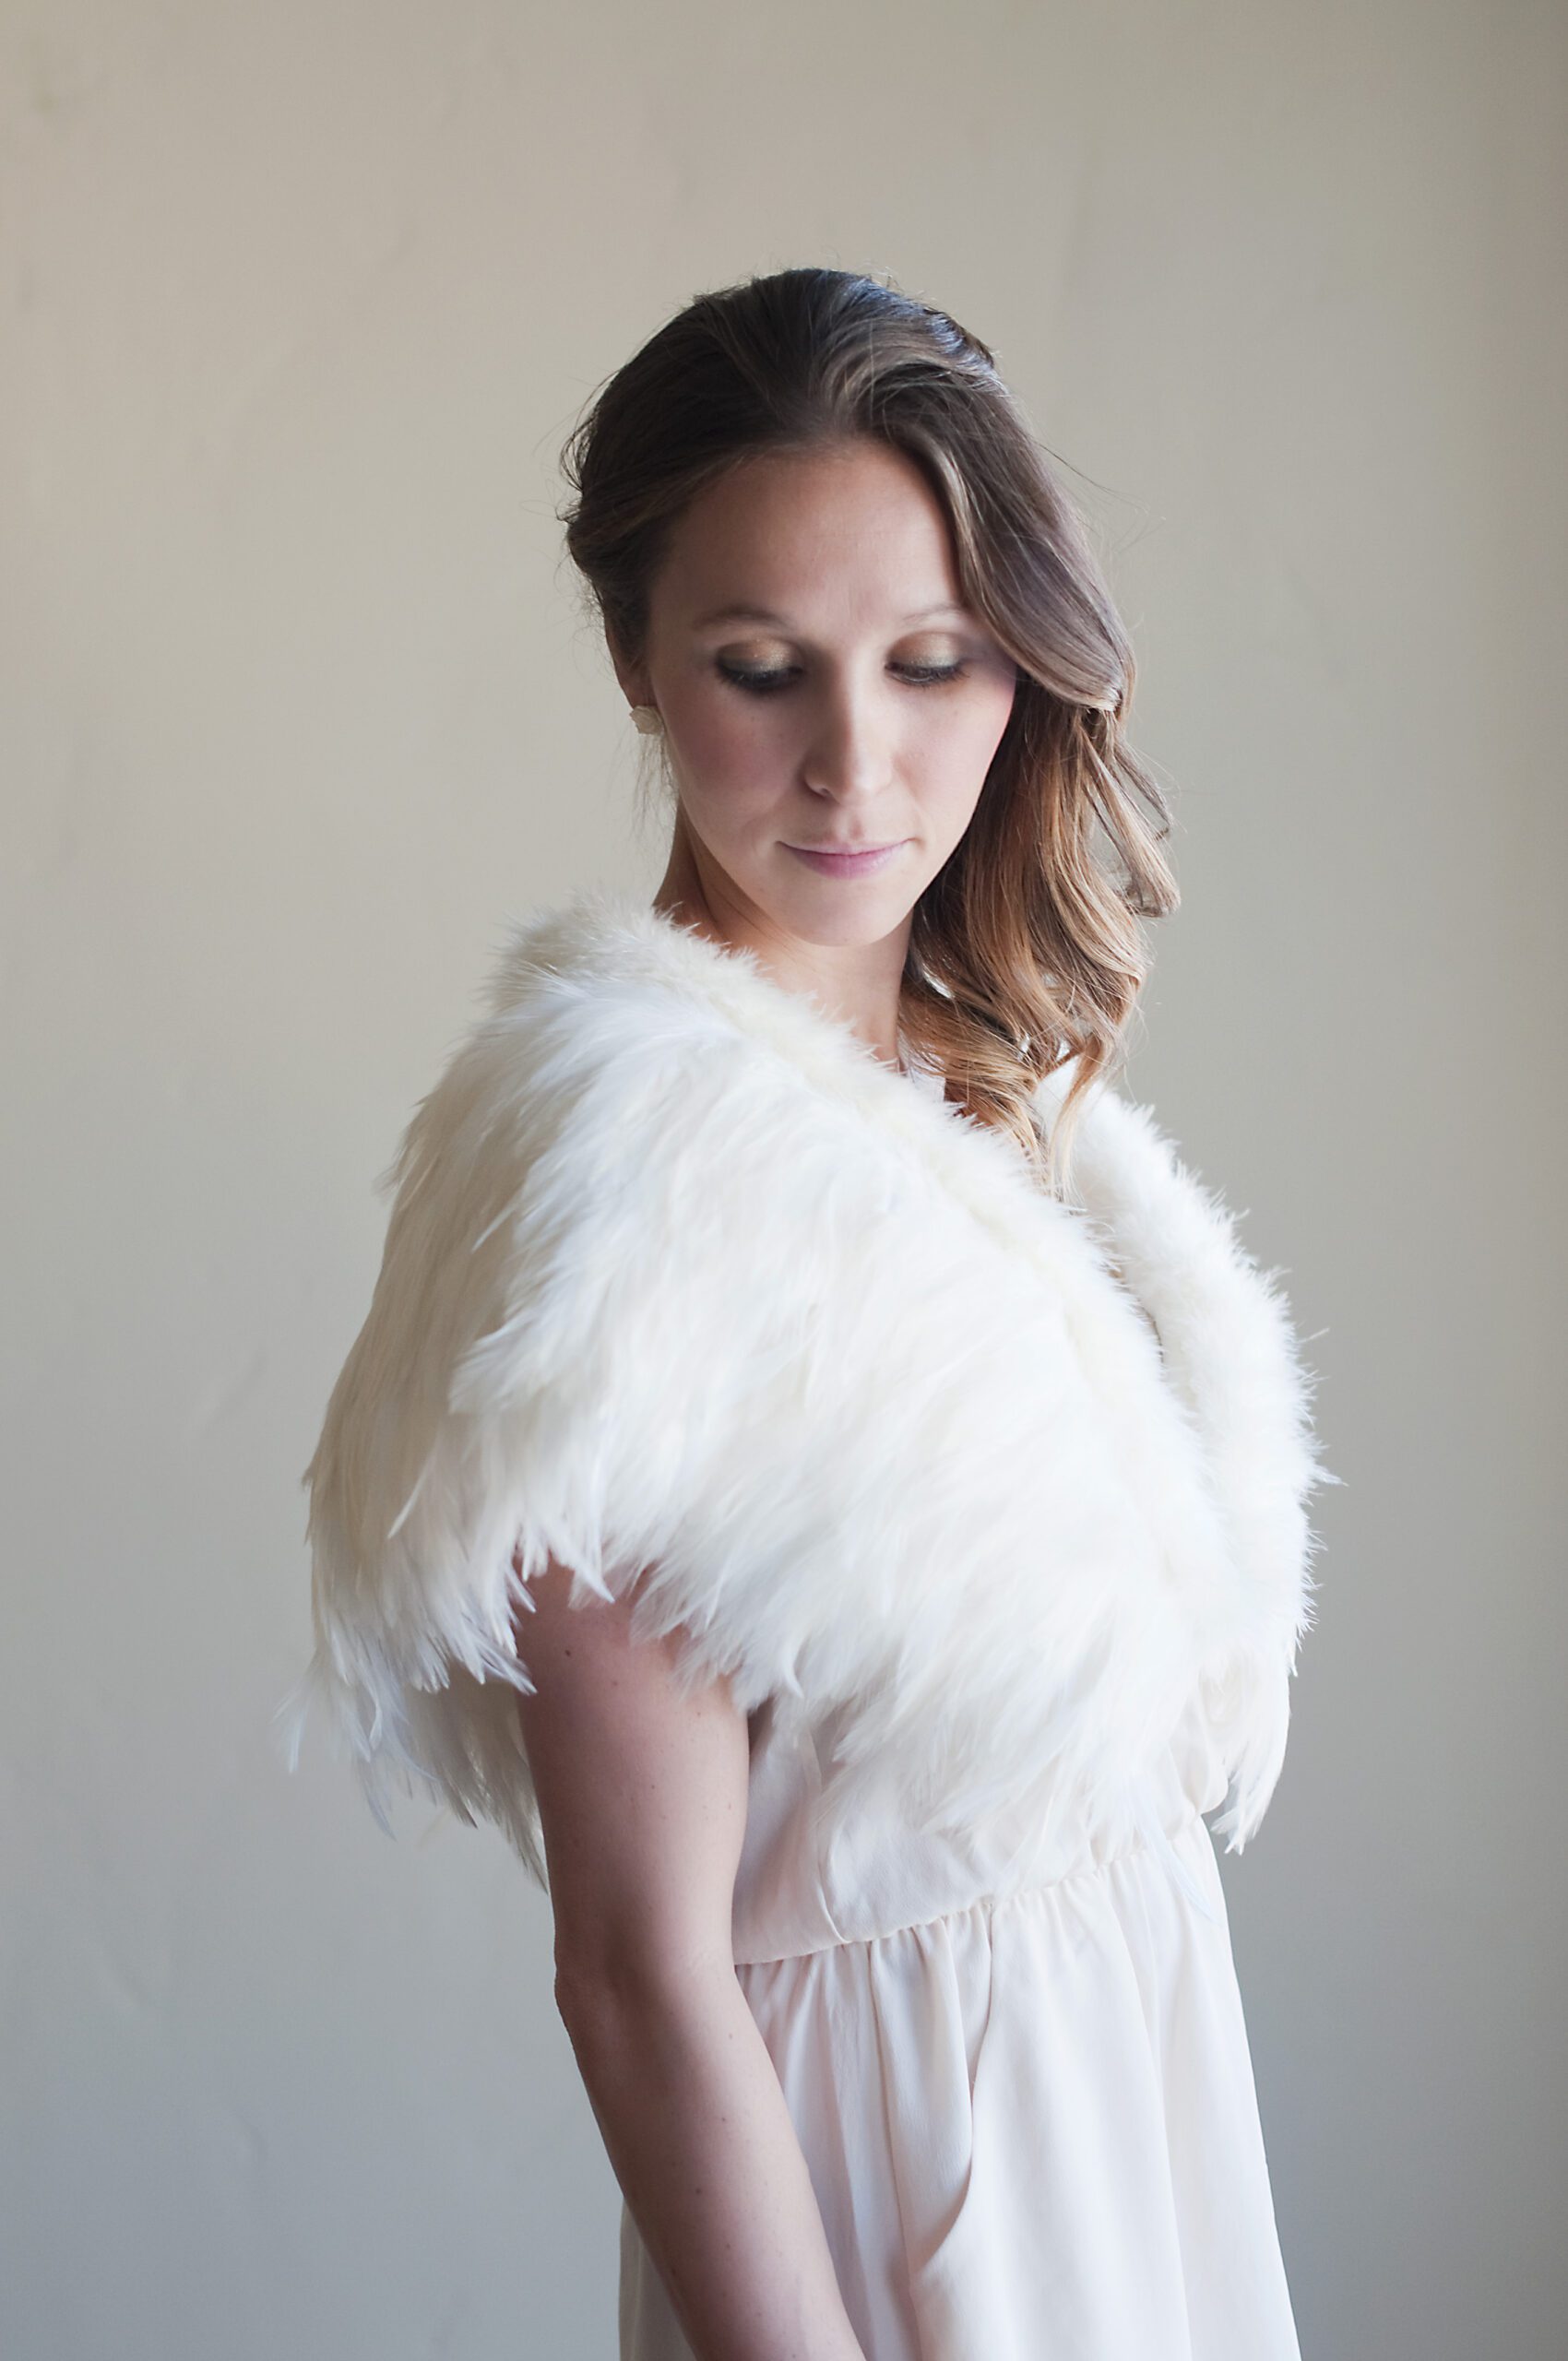 A photo of a feathered wedding shawl in ivory or white